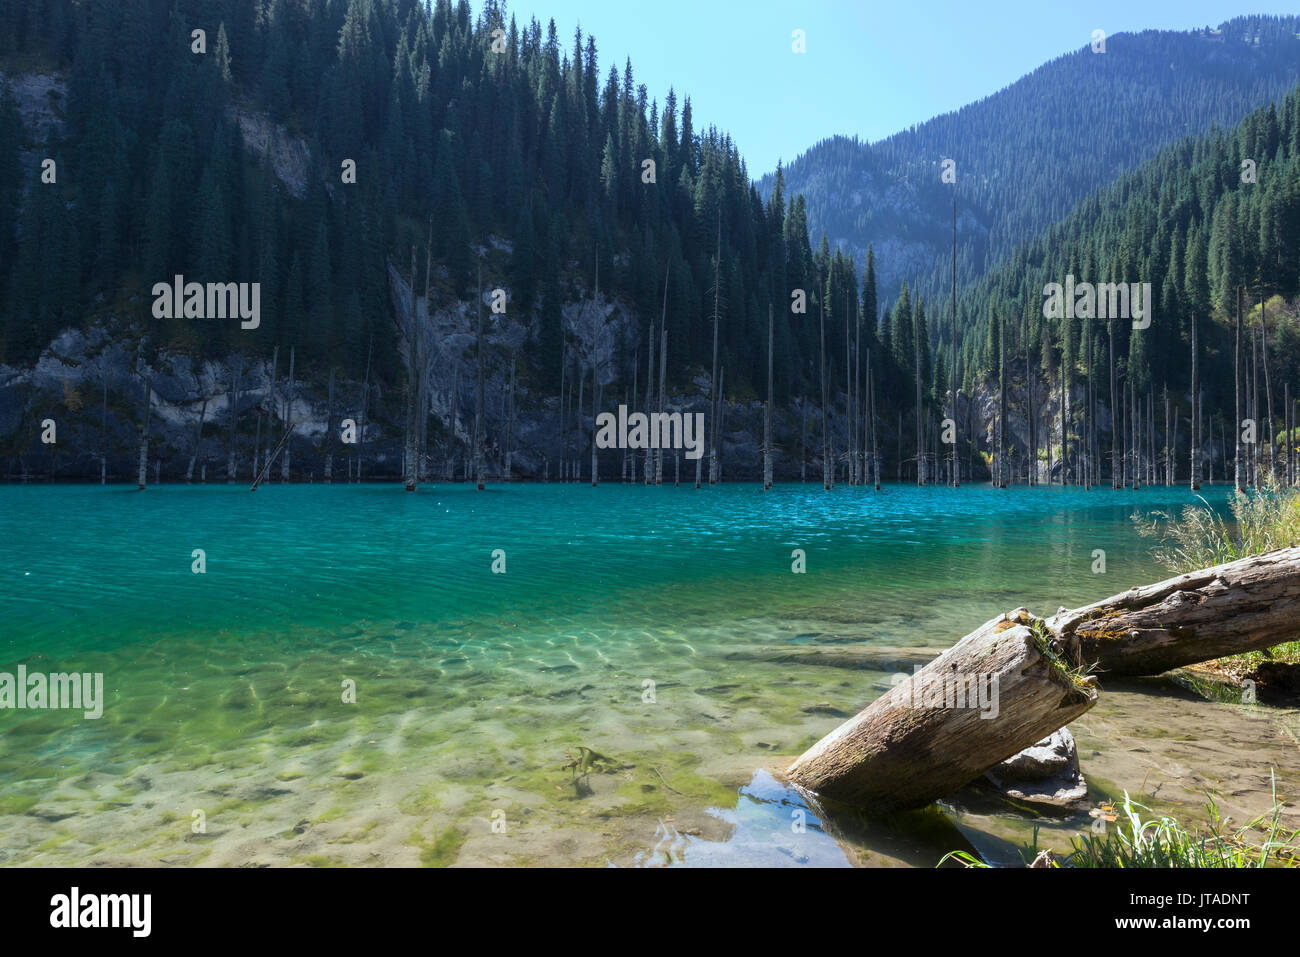 Dried trunks of Picea schrenkiana pointing out of water in Kaindy Lake, Tien Shan Mountains, Kazakhstan, Central Asia, Asia Stock Photo